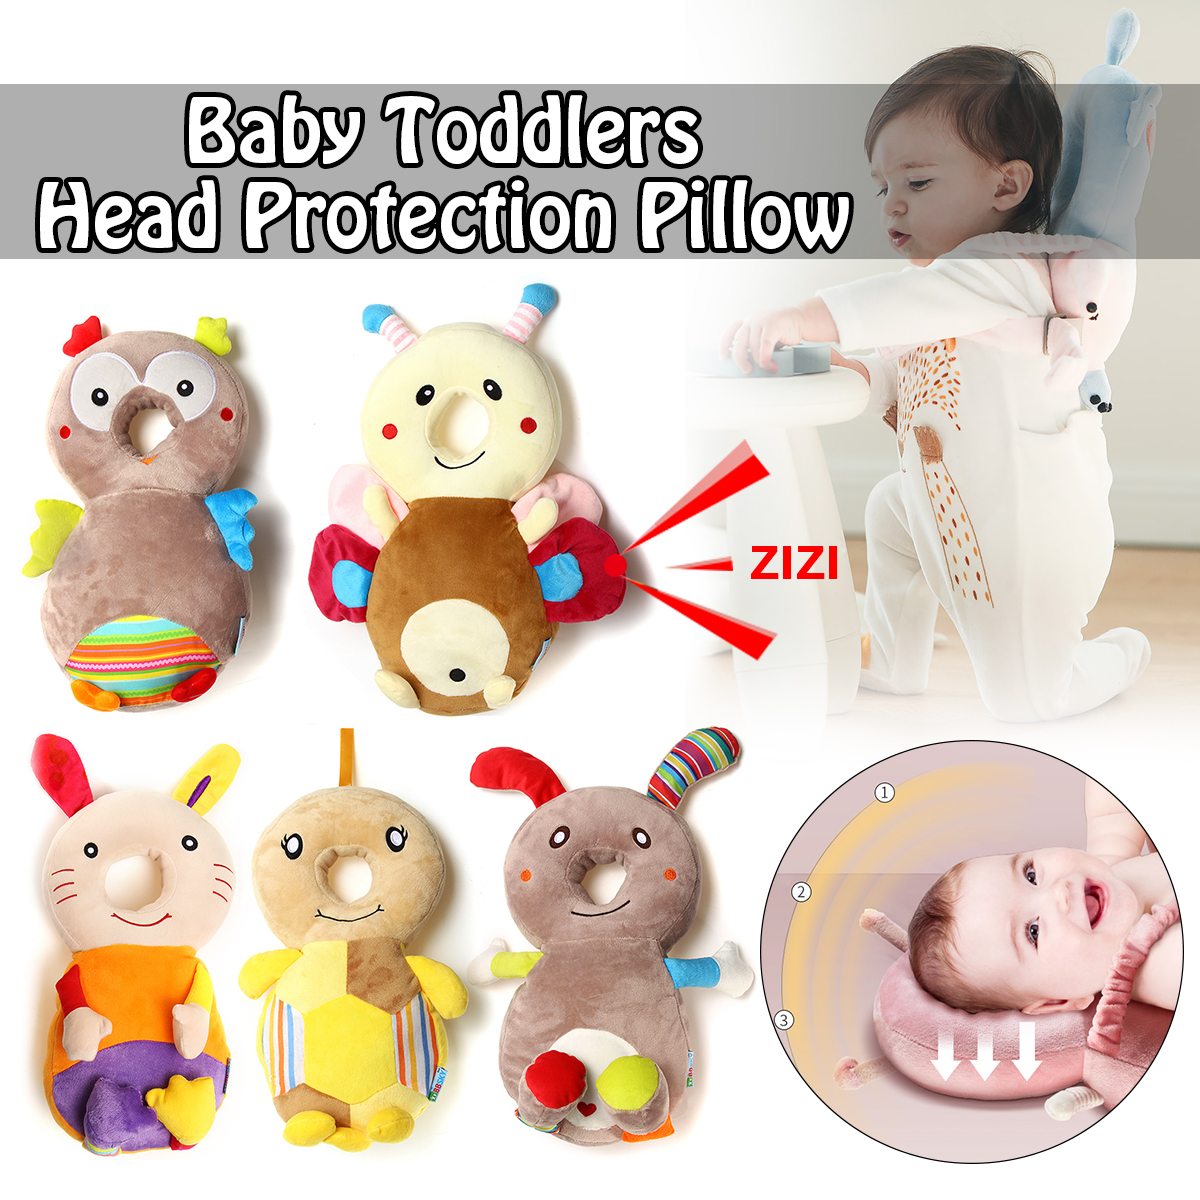 Baby-Toddler-Kids-Head-Cushion-Protection-Pillow-Safety-Pad-for-Crawling-Walking-1472262